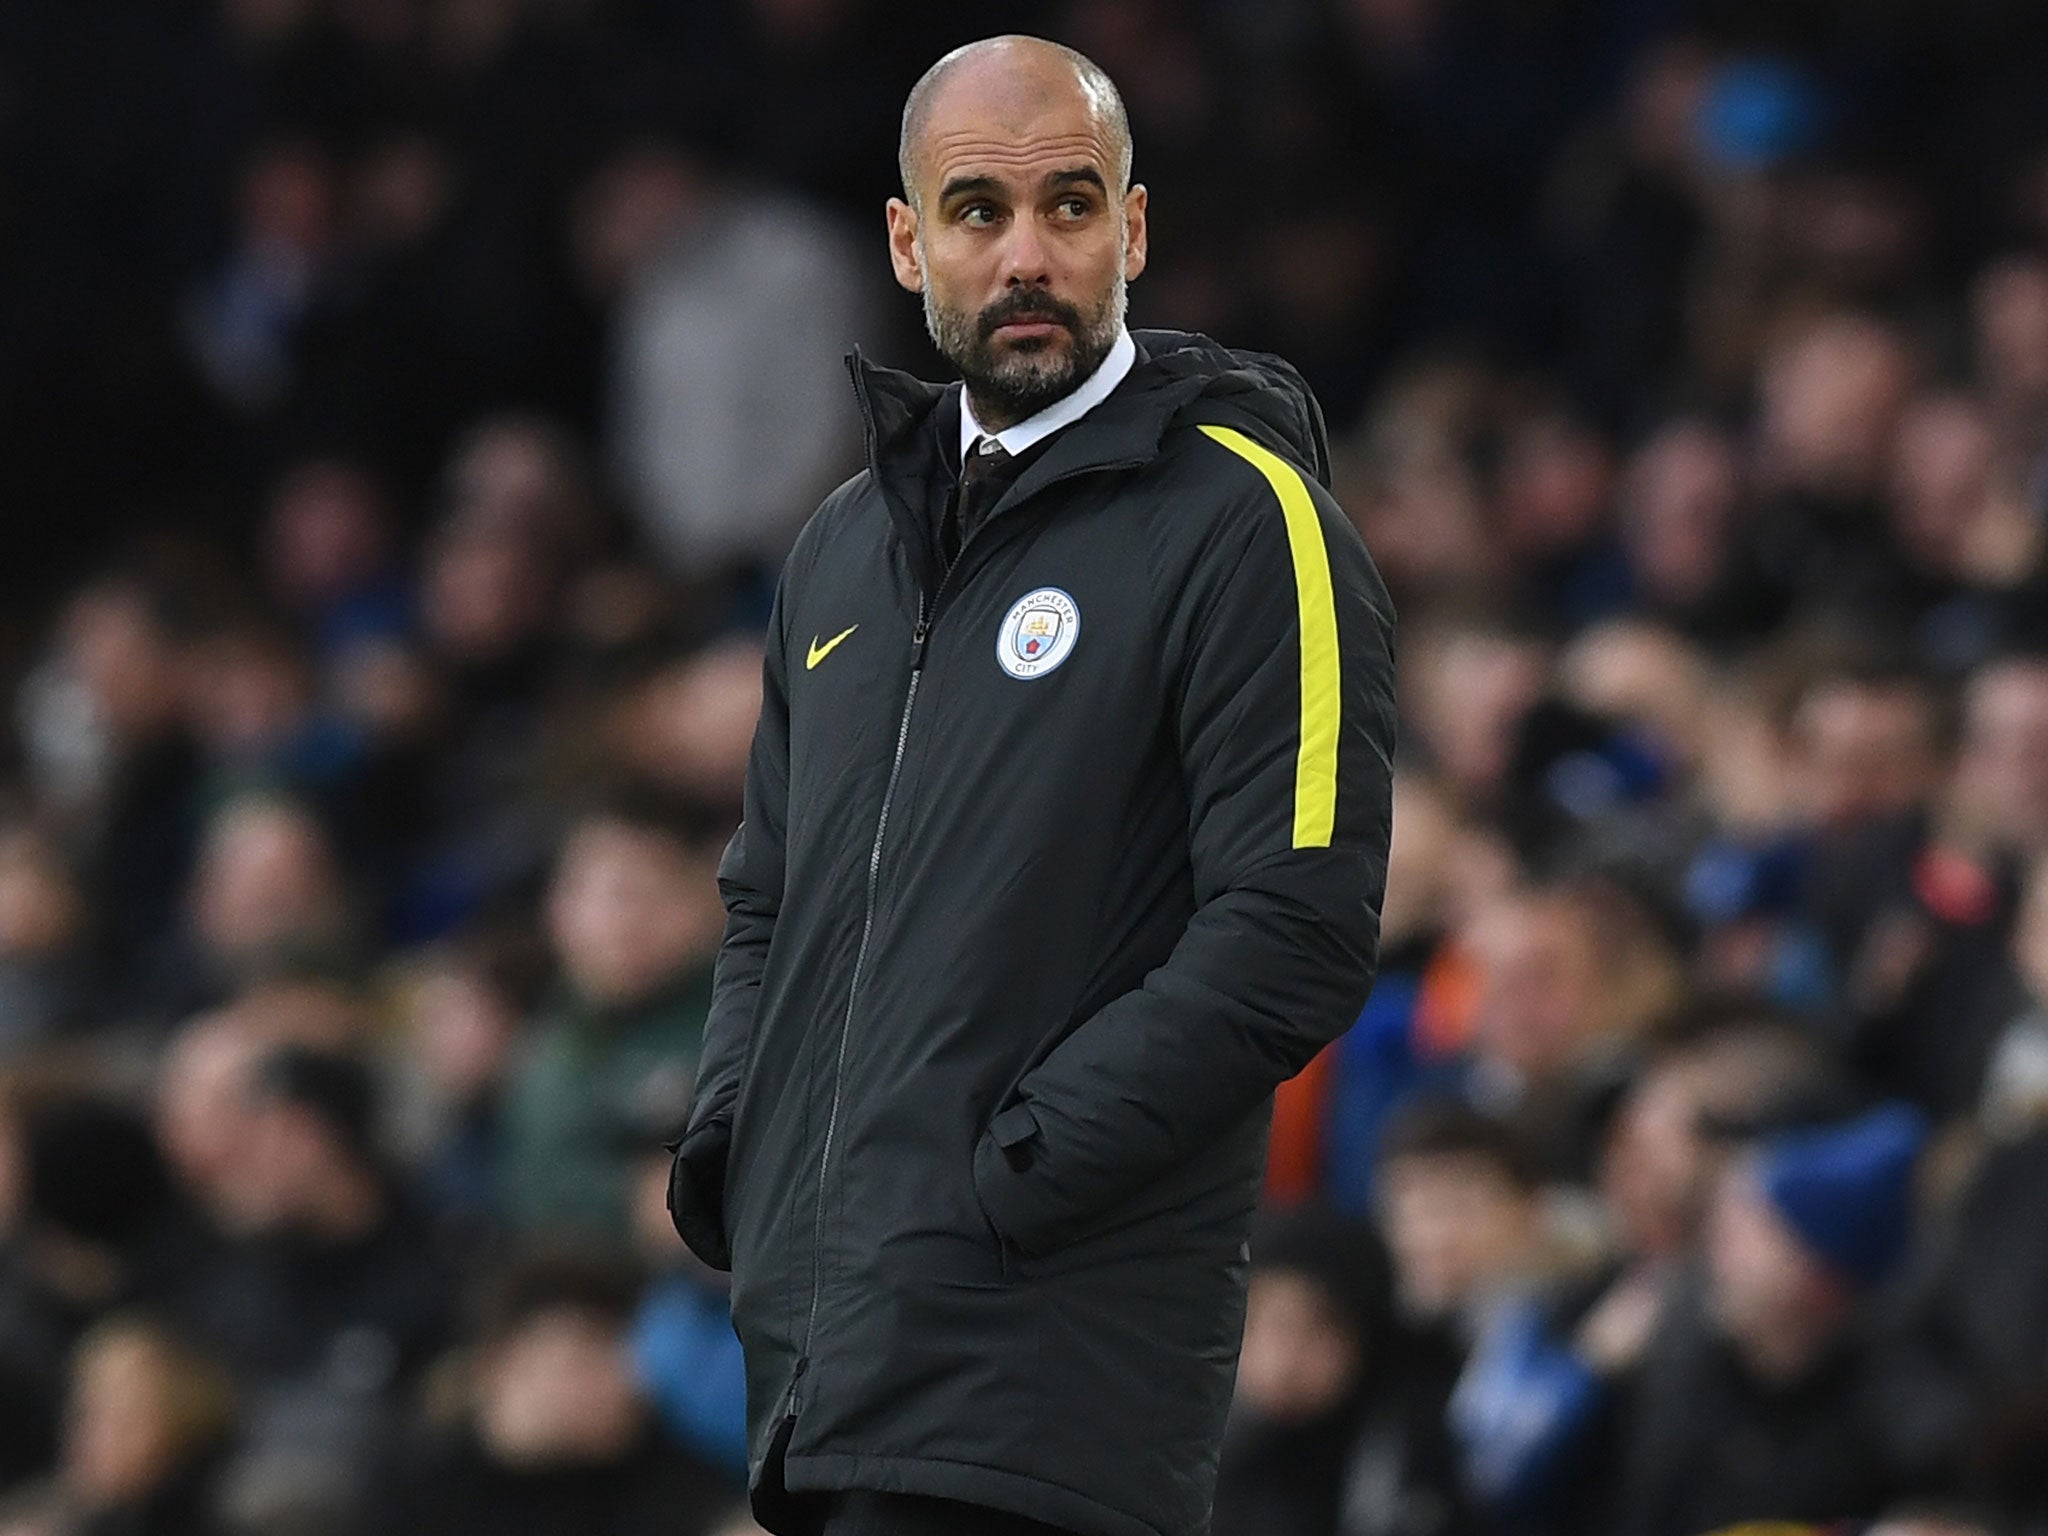 Pep Guardiola has struggled with his defence this season